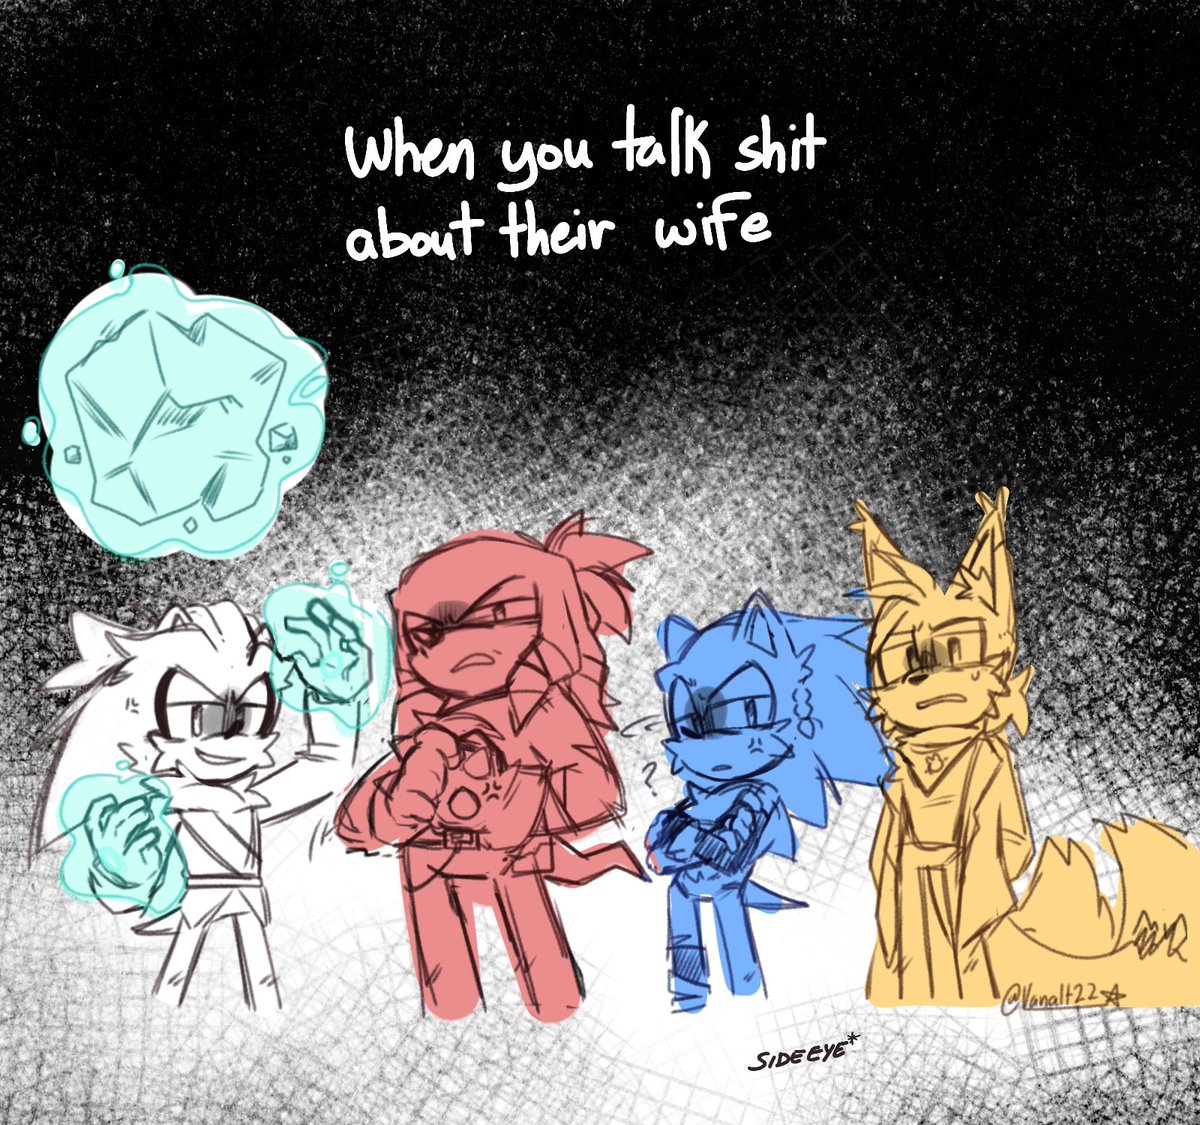 Angy husbands whaba

#silvaze #knuxouge #sonamy #taiream